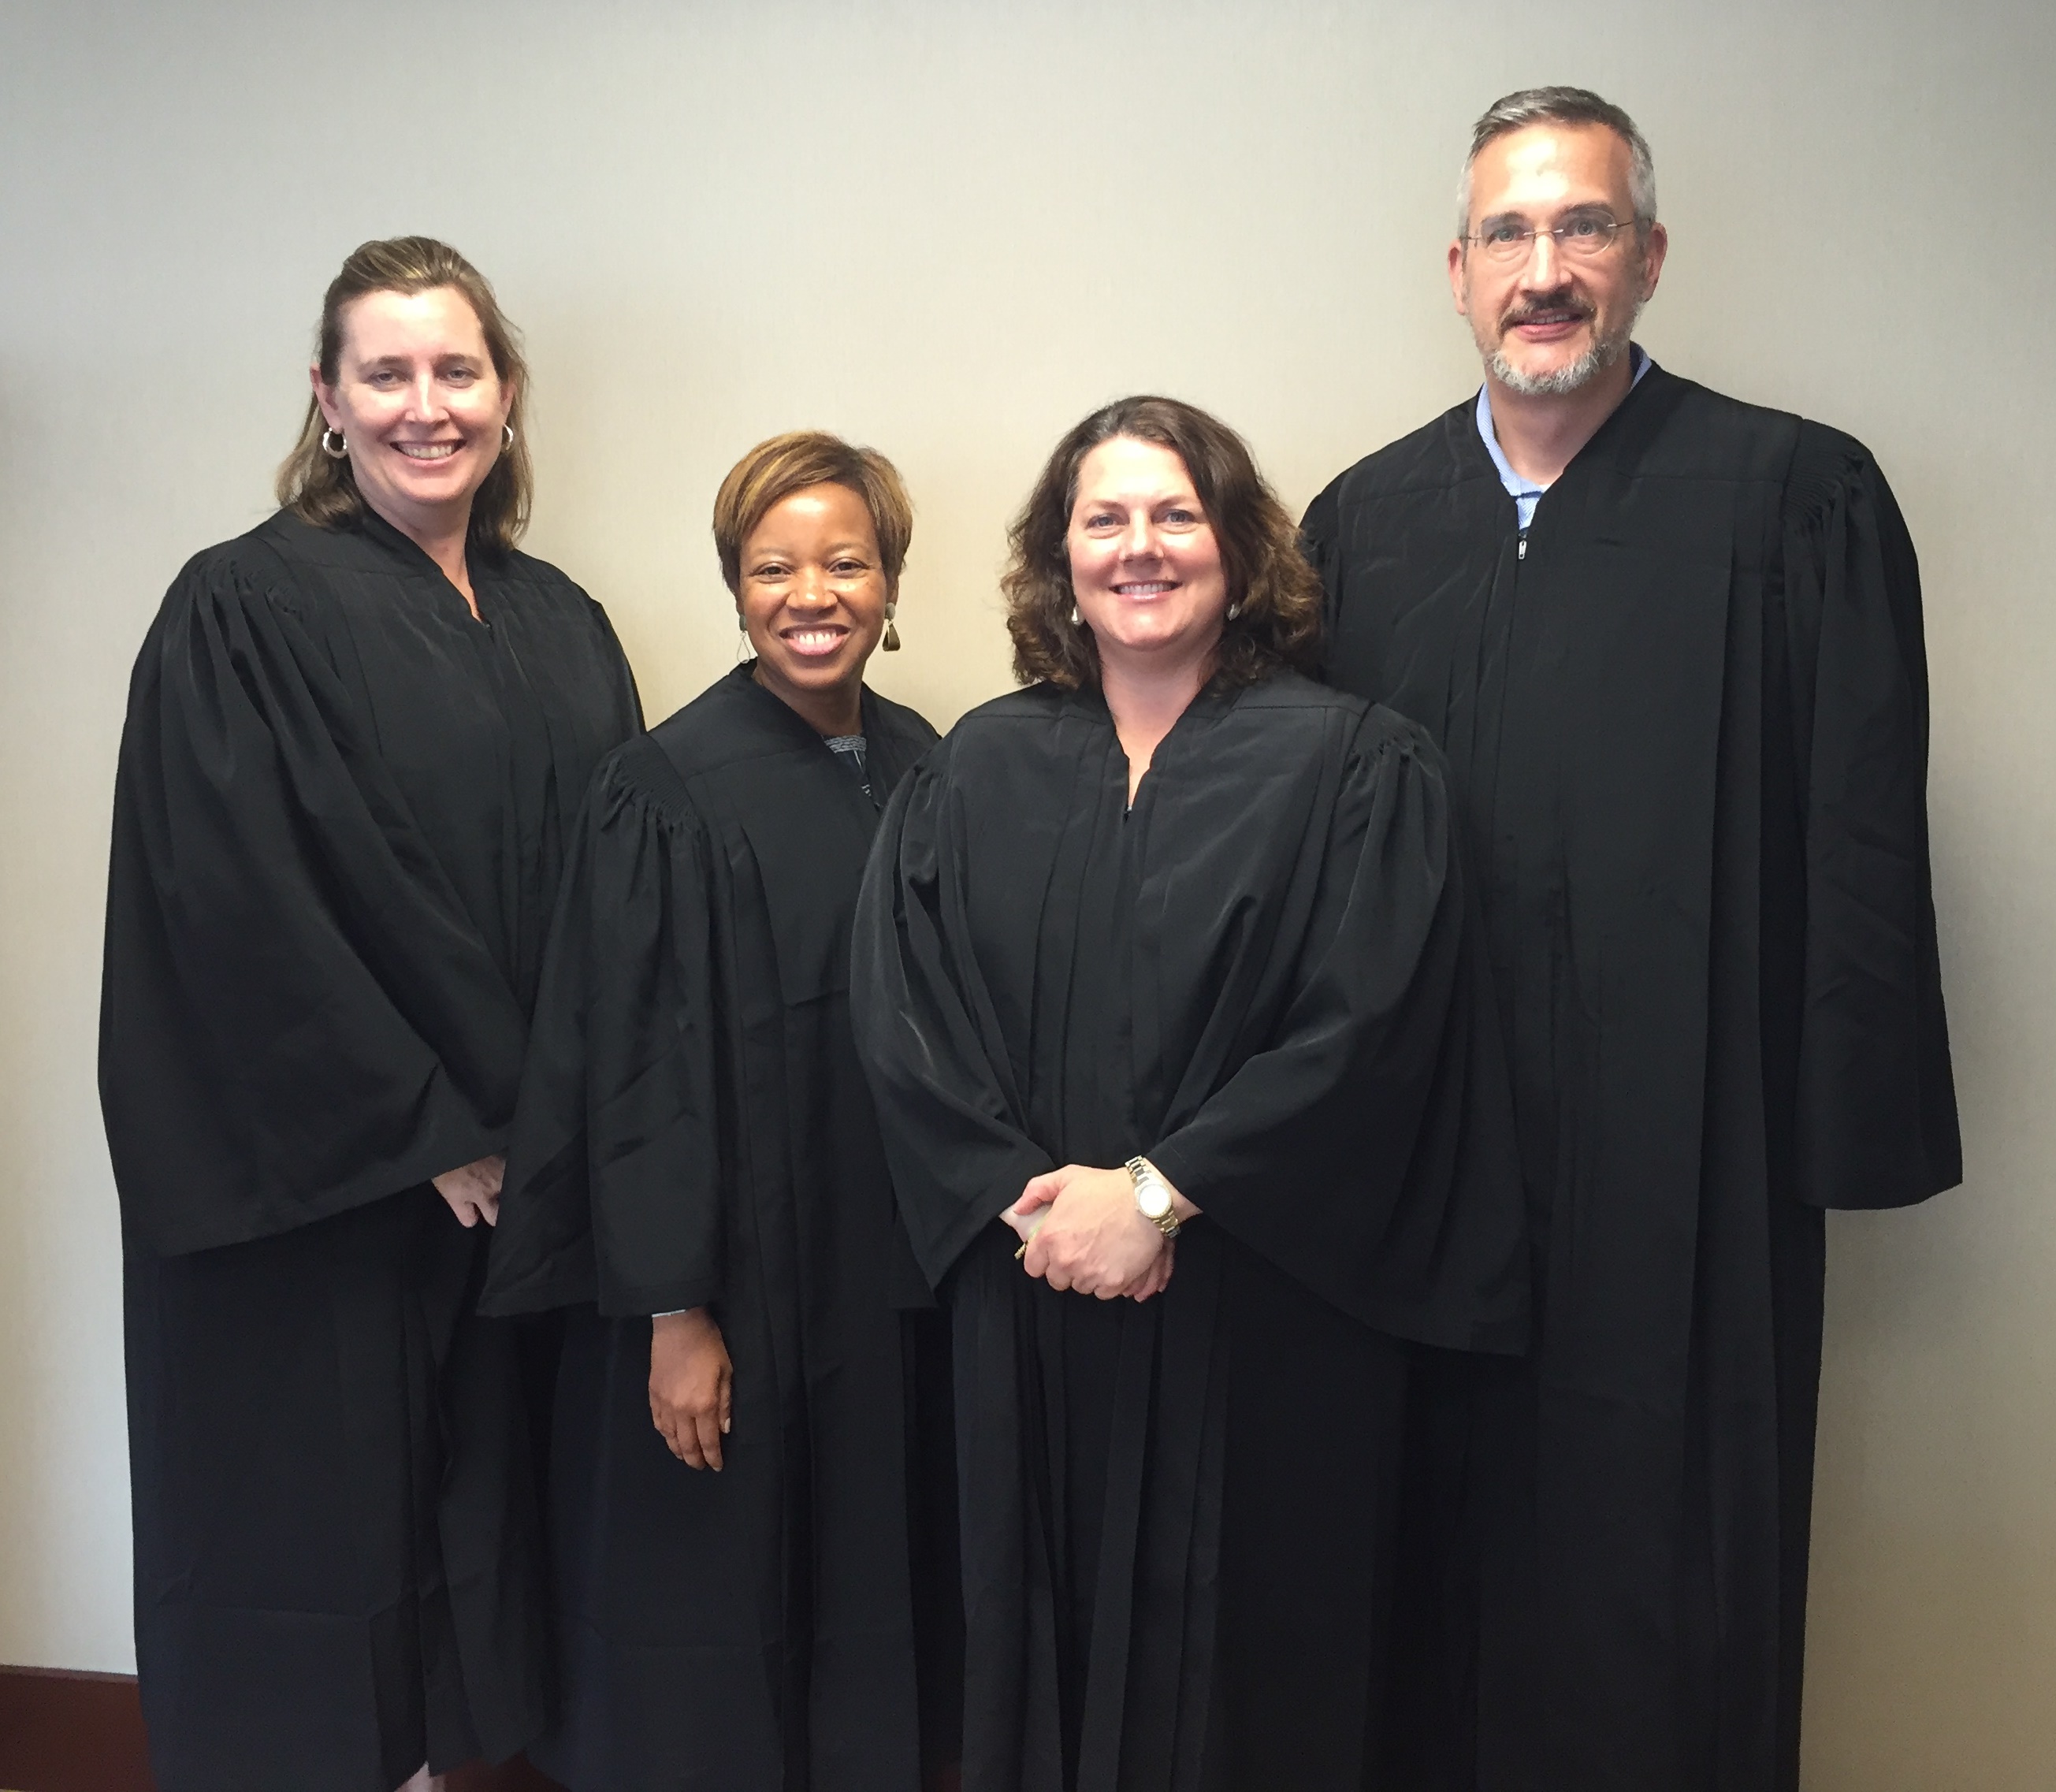 From left to right, the new CBCA judges are Erica S. Beardsley, Beverly M. Russell, Kathleen J. O’Rourke, and Kyle E. Chadwick